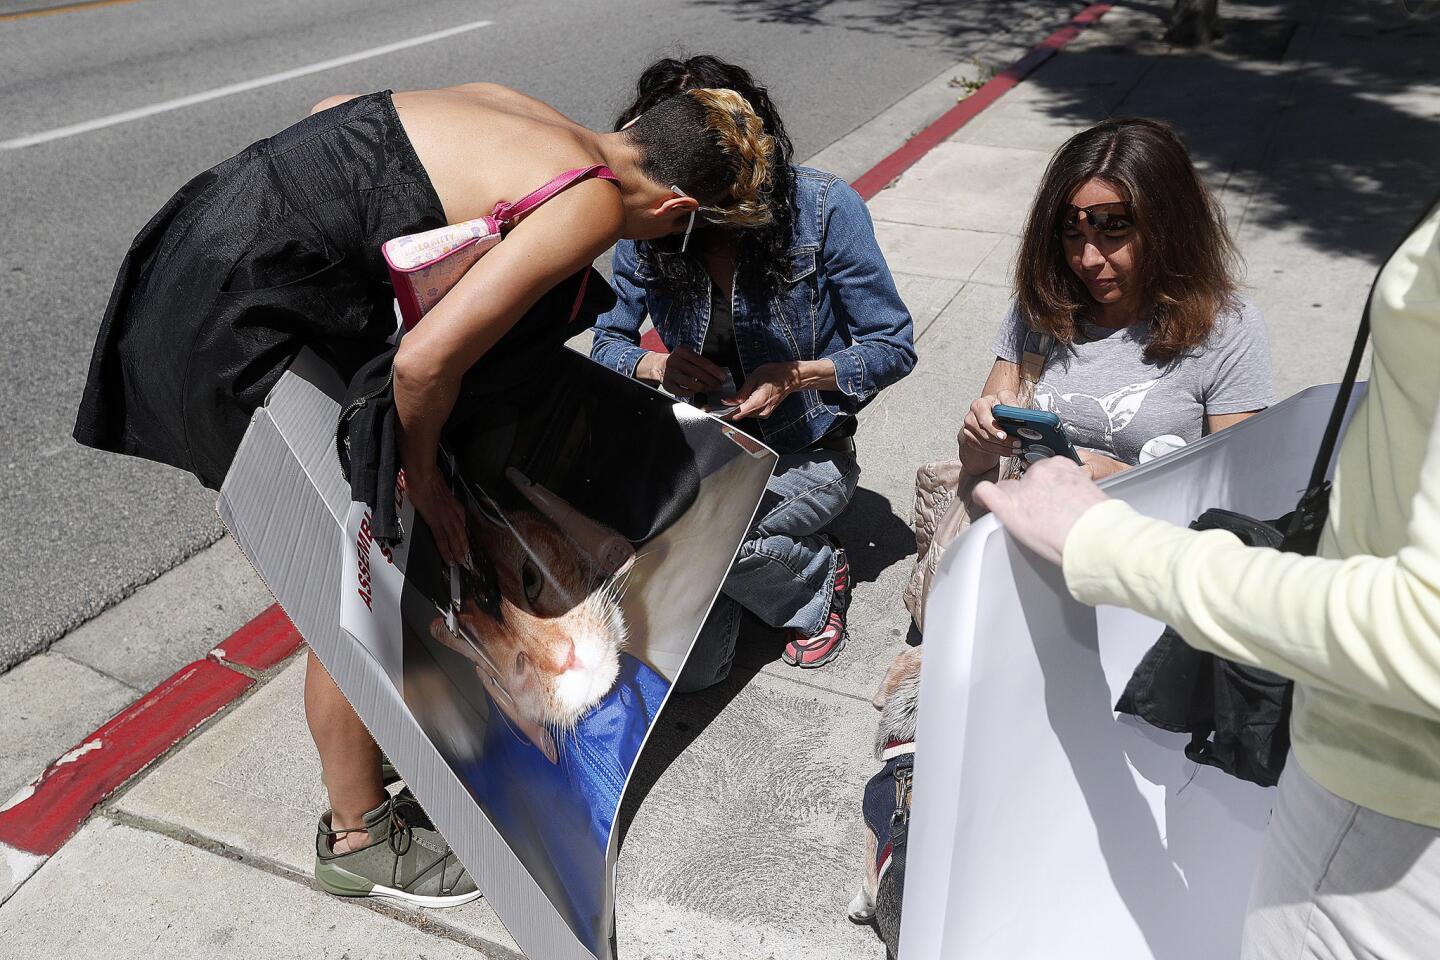 Women with Progress for Science, on a very windy afternoon, attempt to put together protest signs at California Assemblymember Laura Friedman's district office in Burbank on Wednesday, April 10, 2019. Assemblymember Friedman introduced AB-700, a bill that would block access to information about how animals are being used in science.